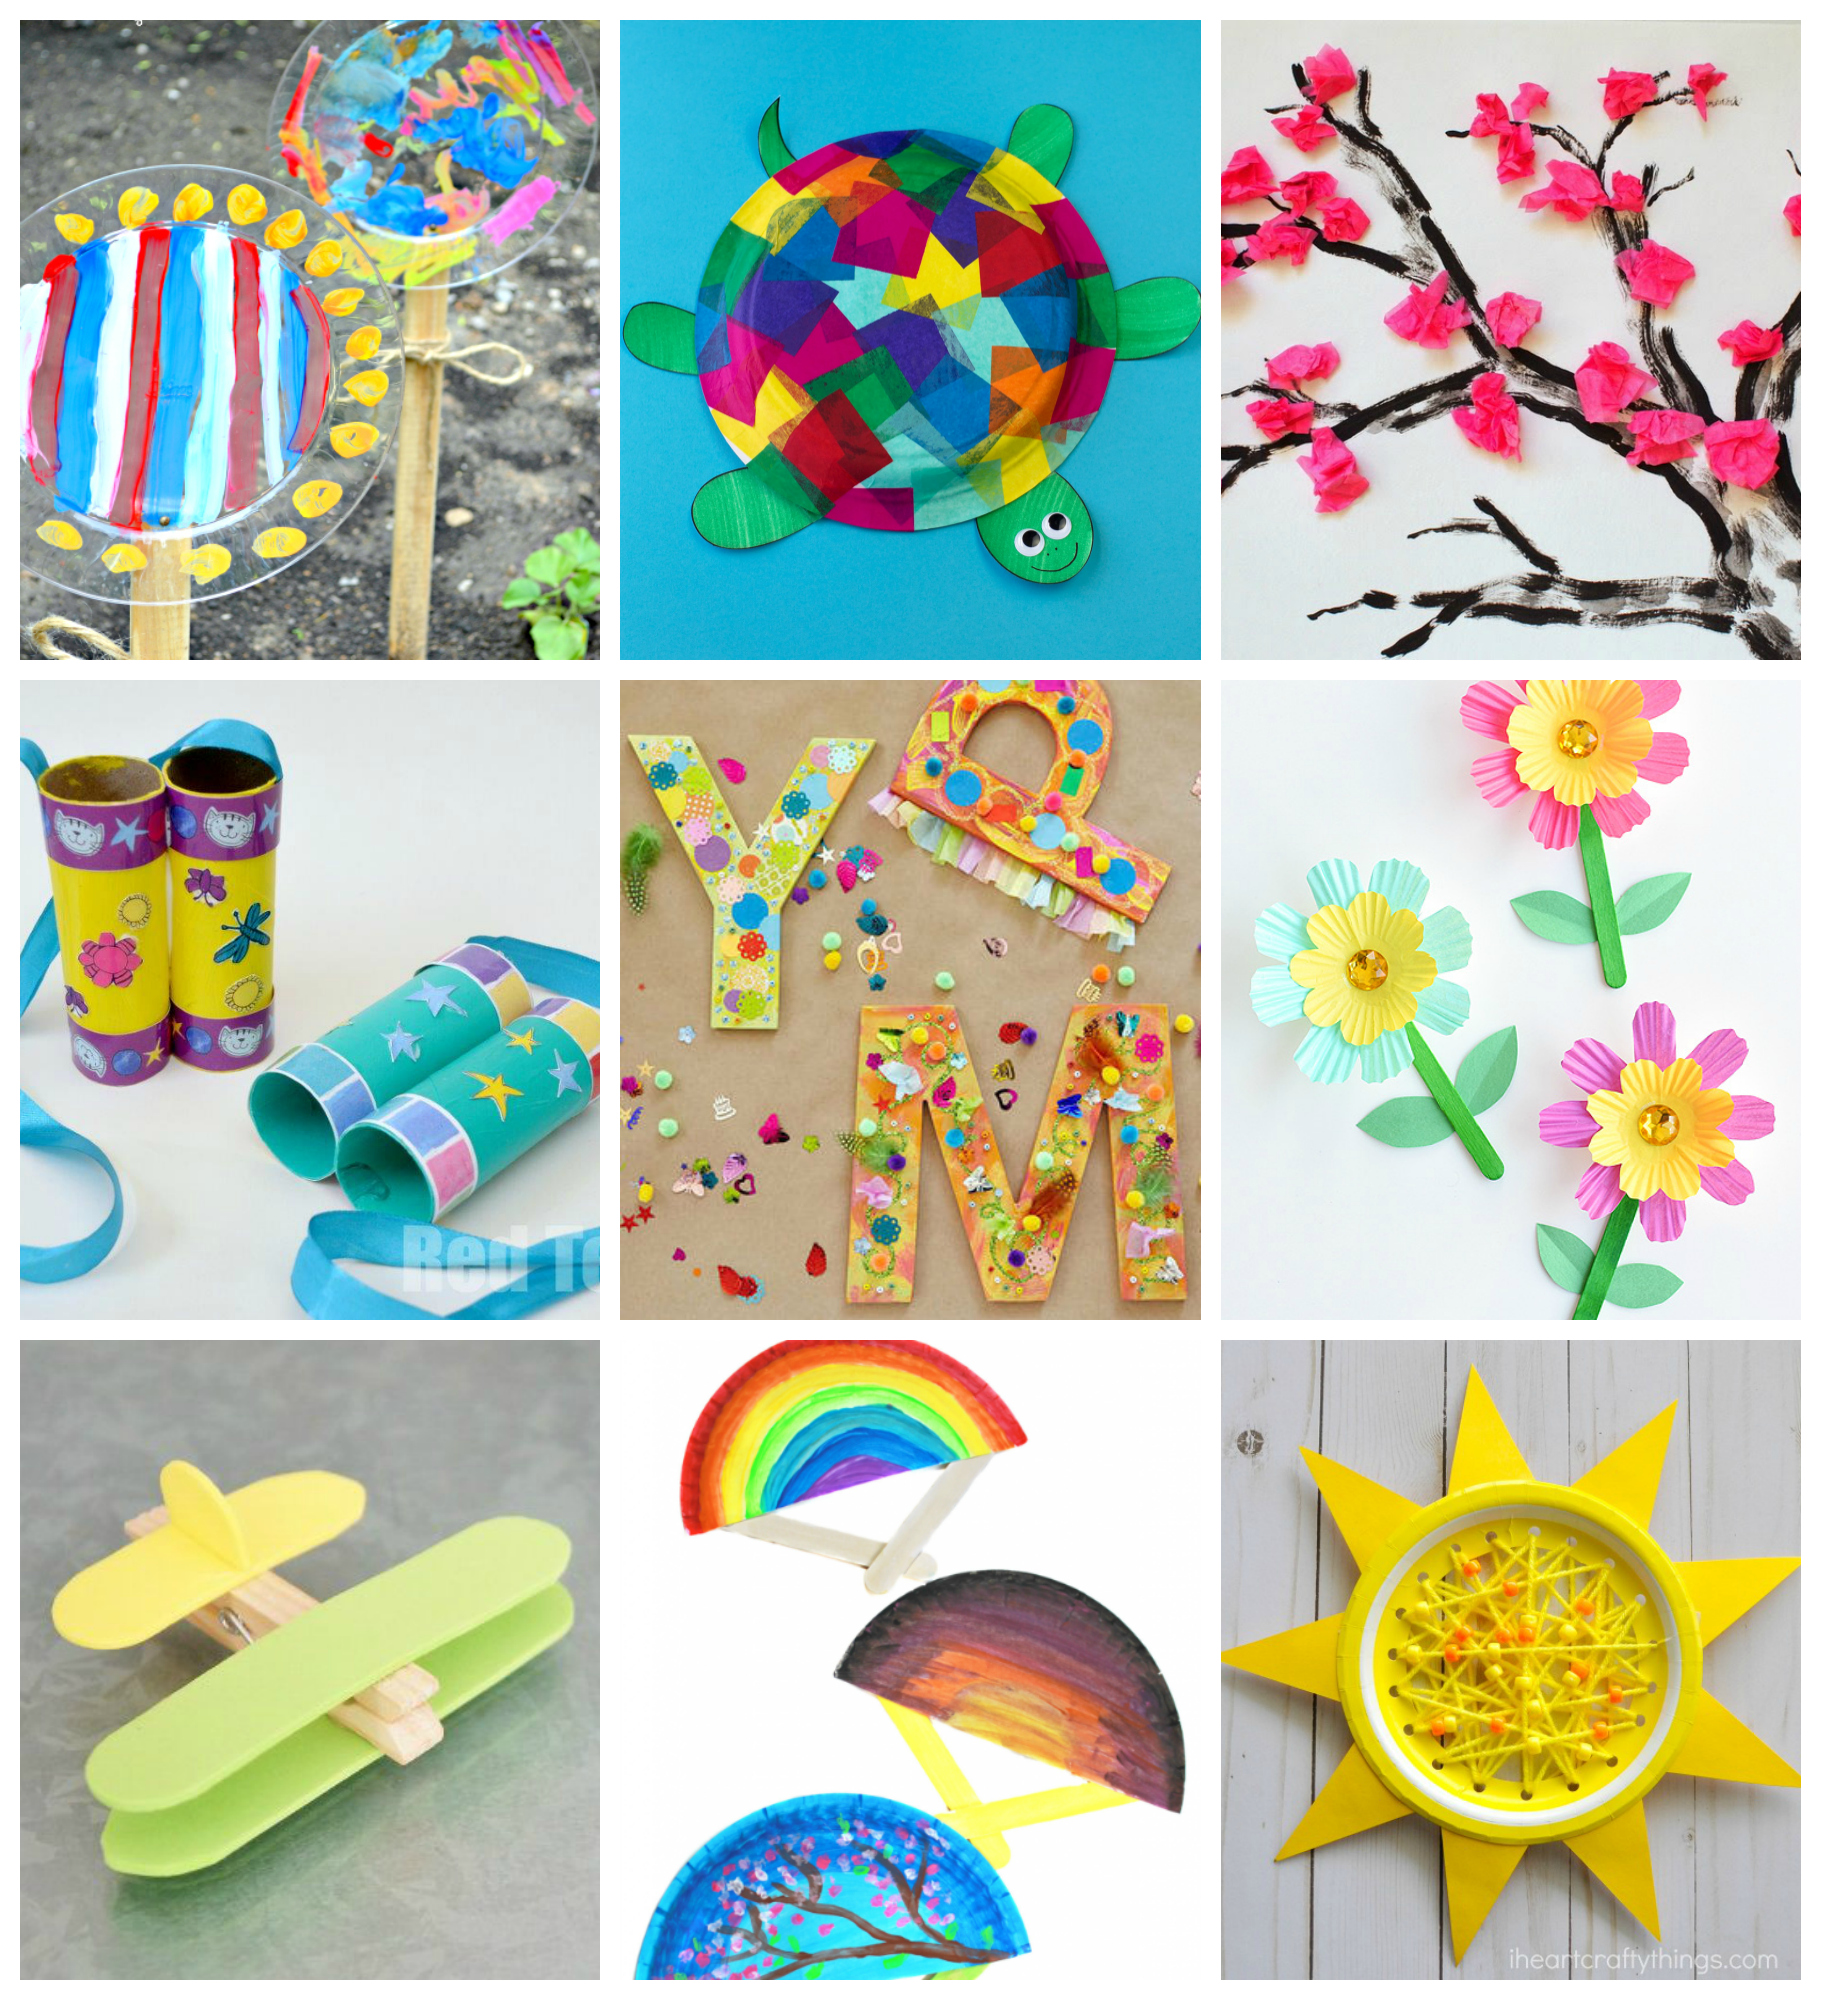 50 Easy Process Art Activities For Kids Fun At Home With Kids | Images ...